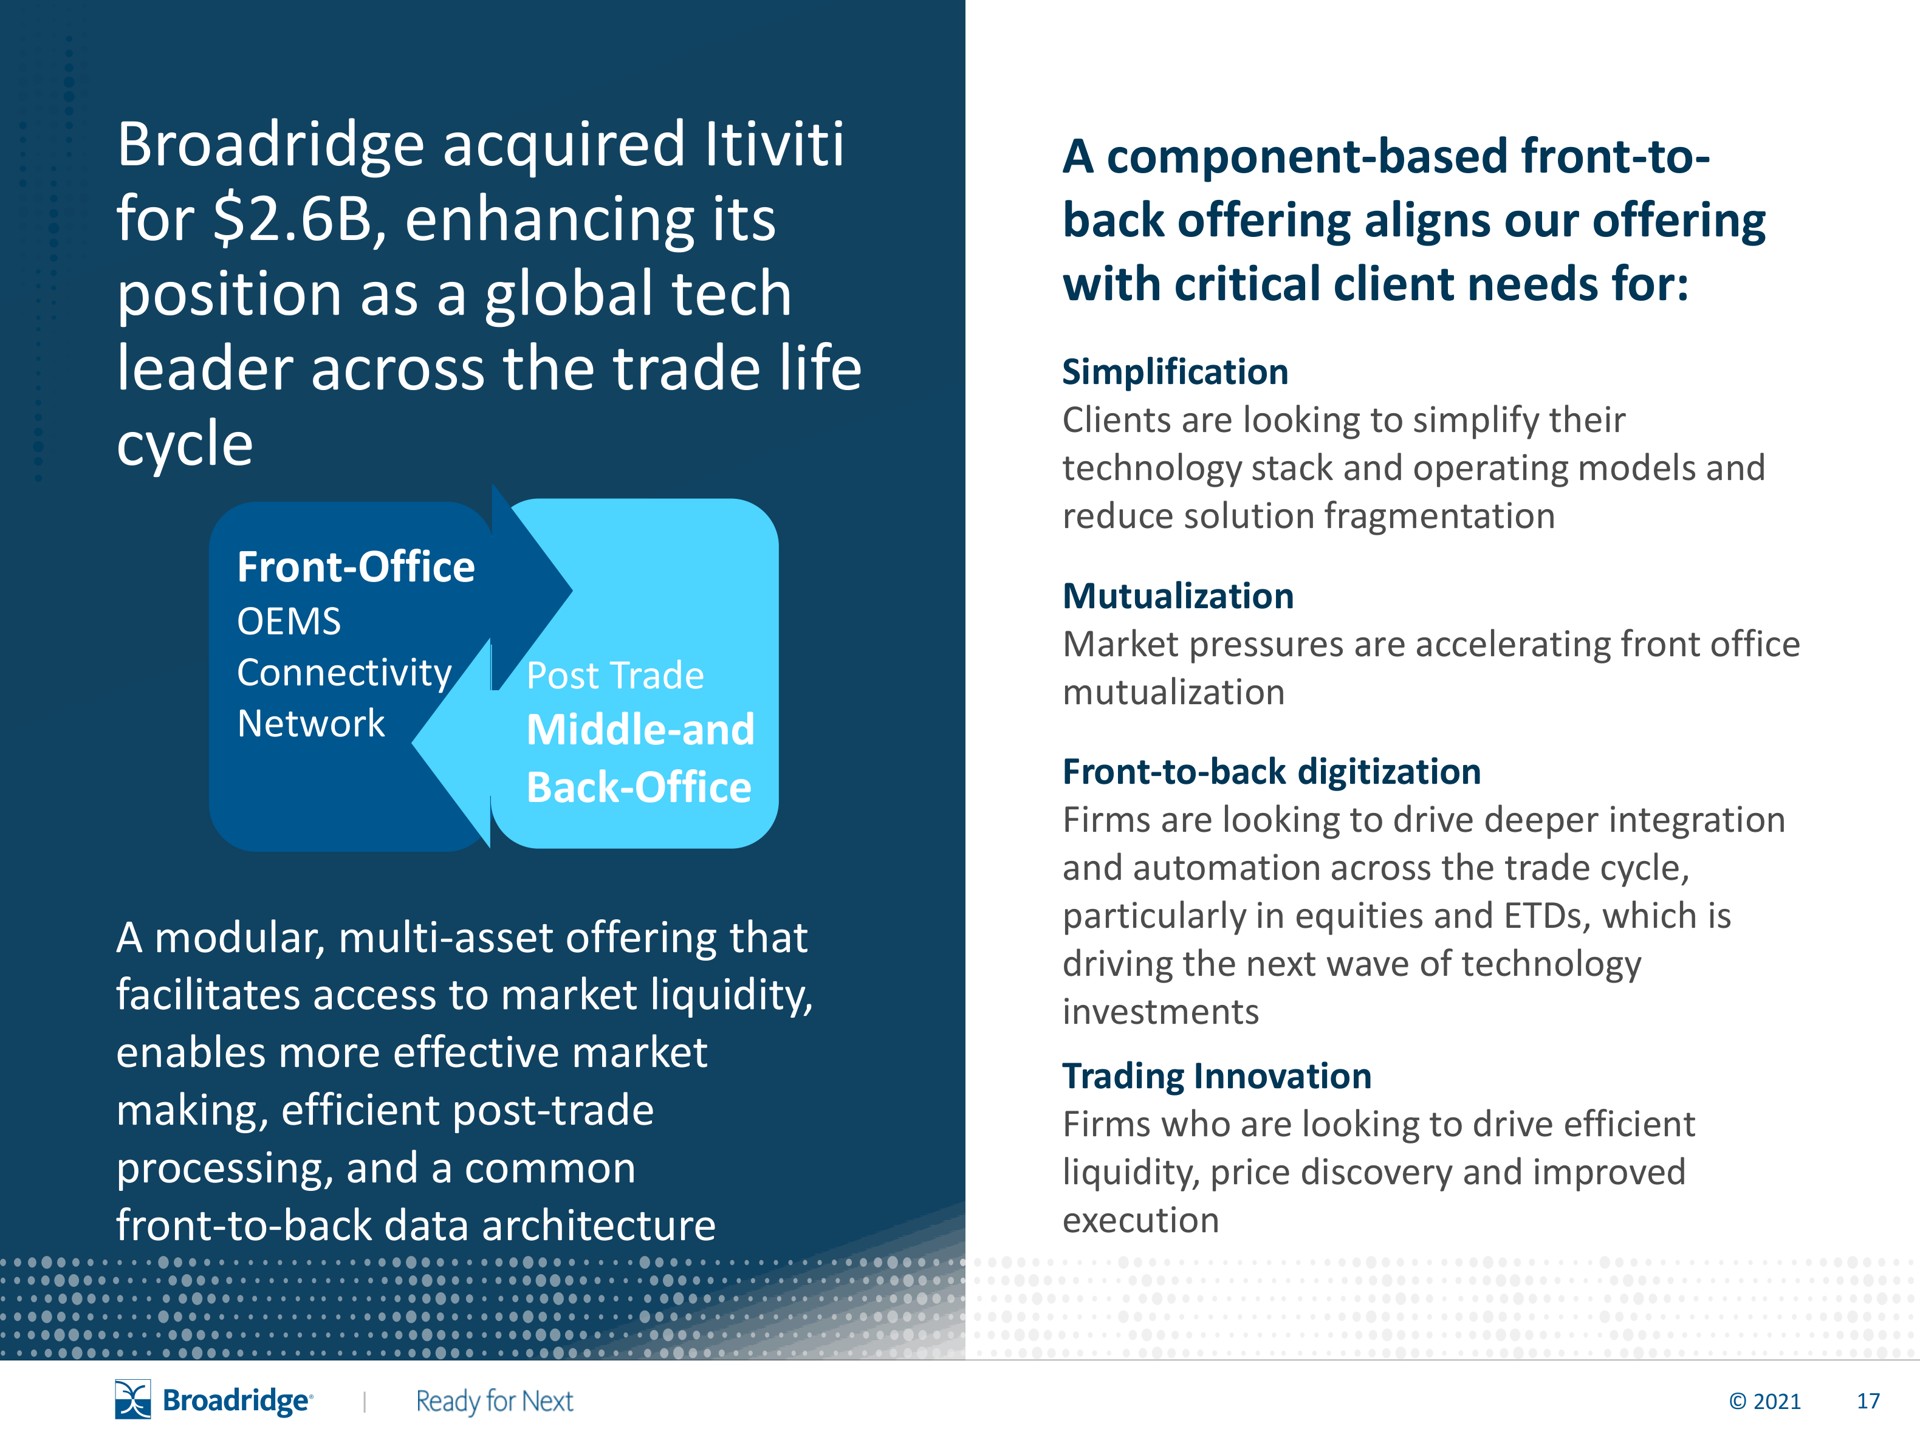 acquired for enhancing its position as a global tech leader across the trade life cycle | Broadridge Financial Solutions